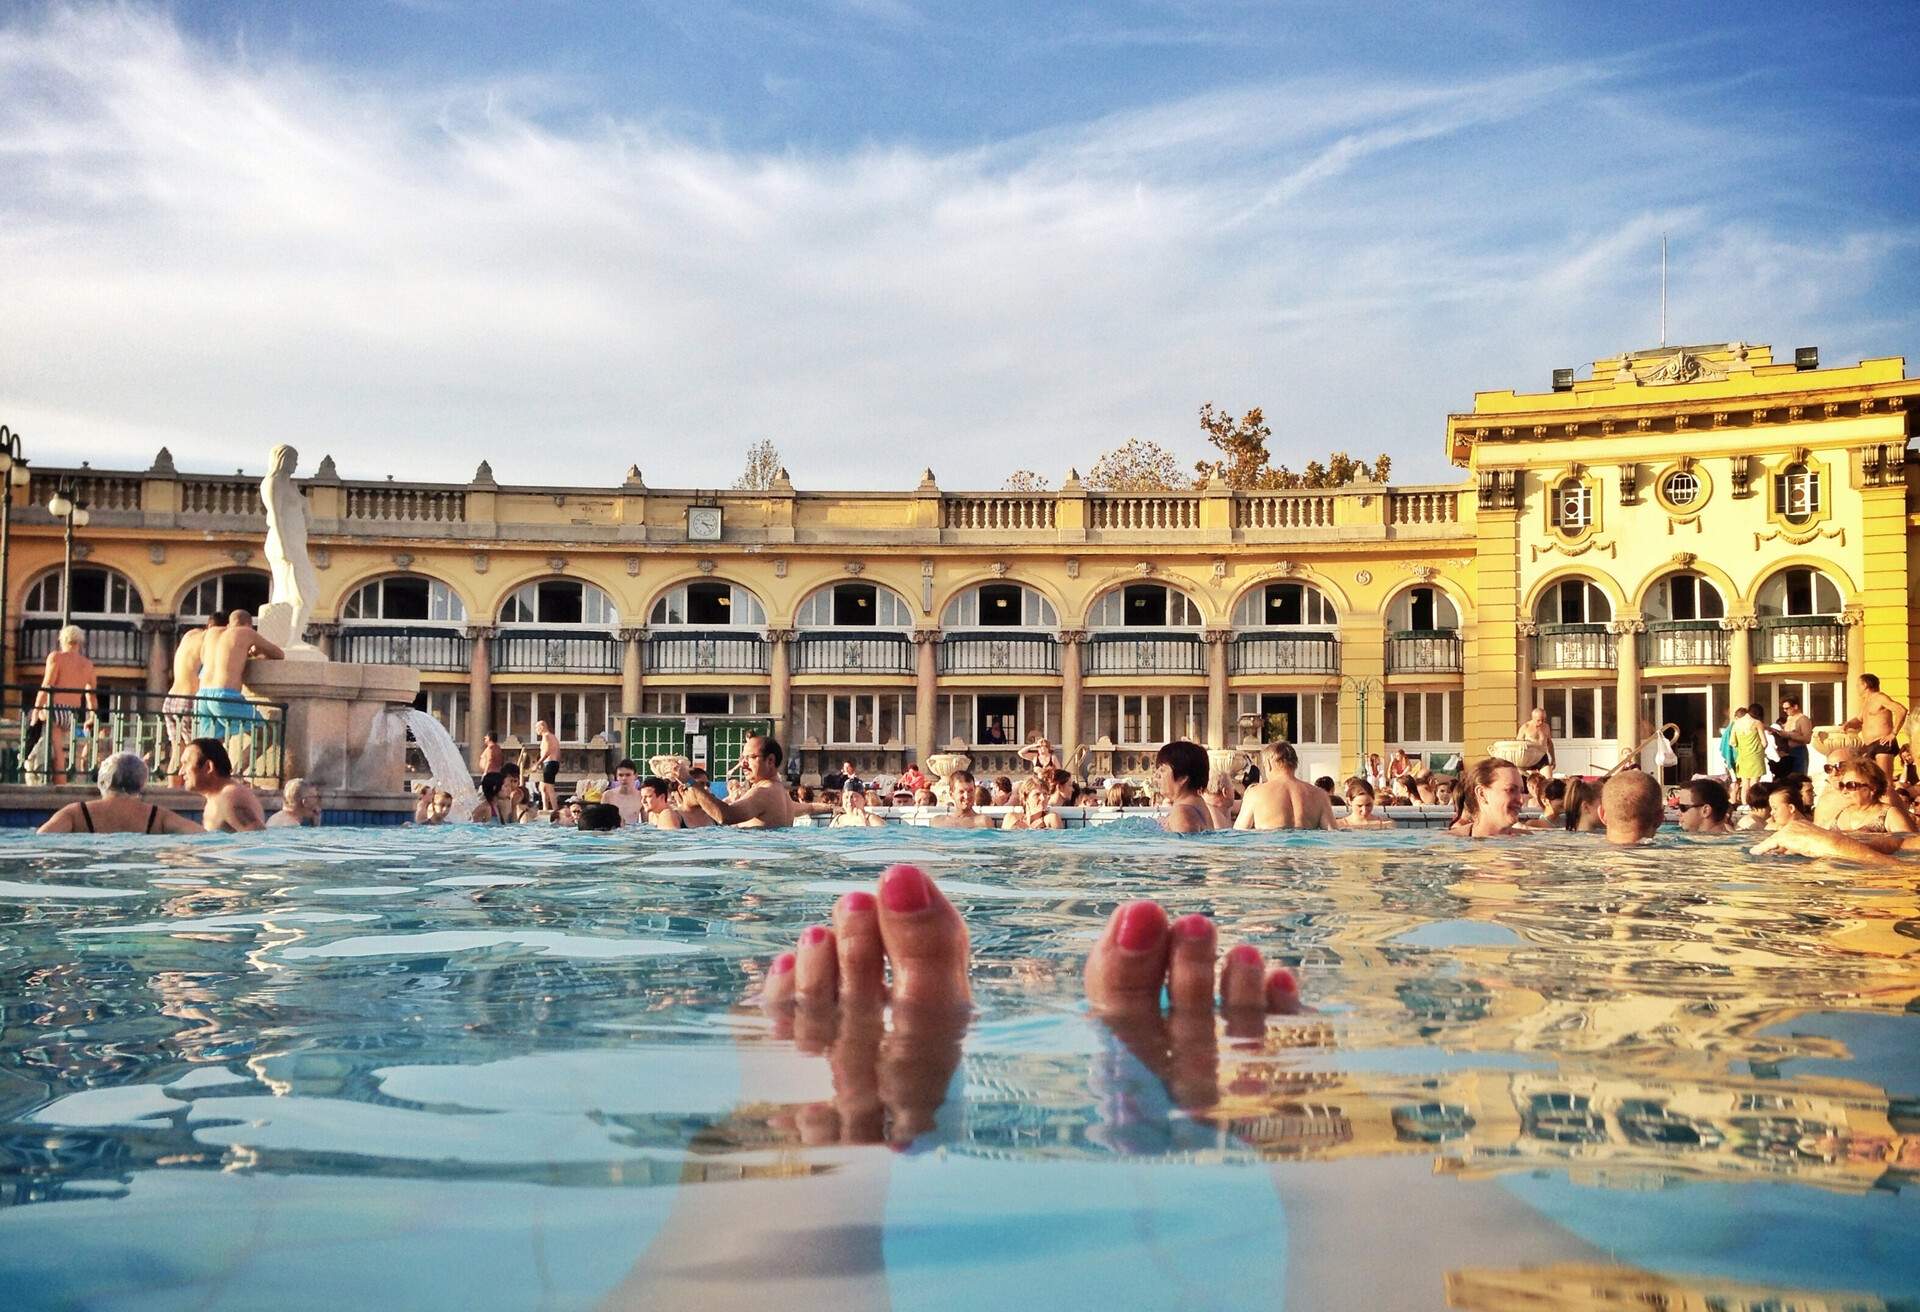 Hungarian baths culture, people bathing at Szechenyi thermal bath in Budapest